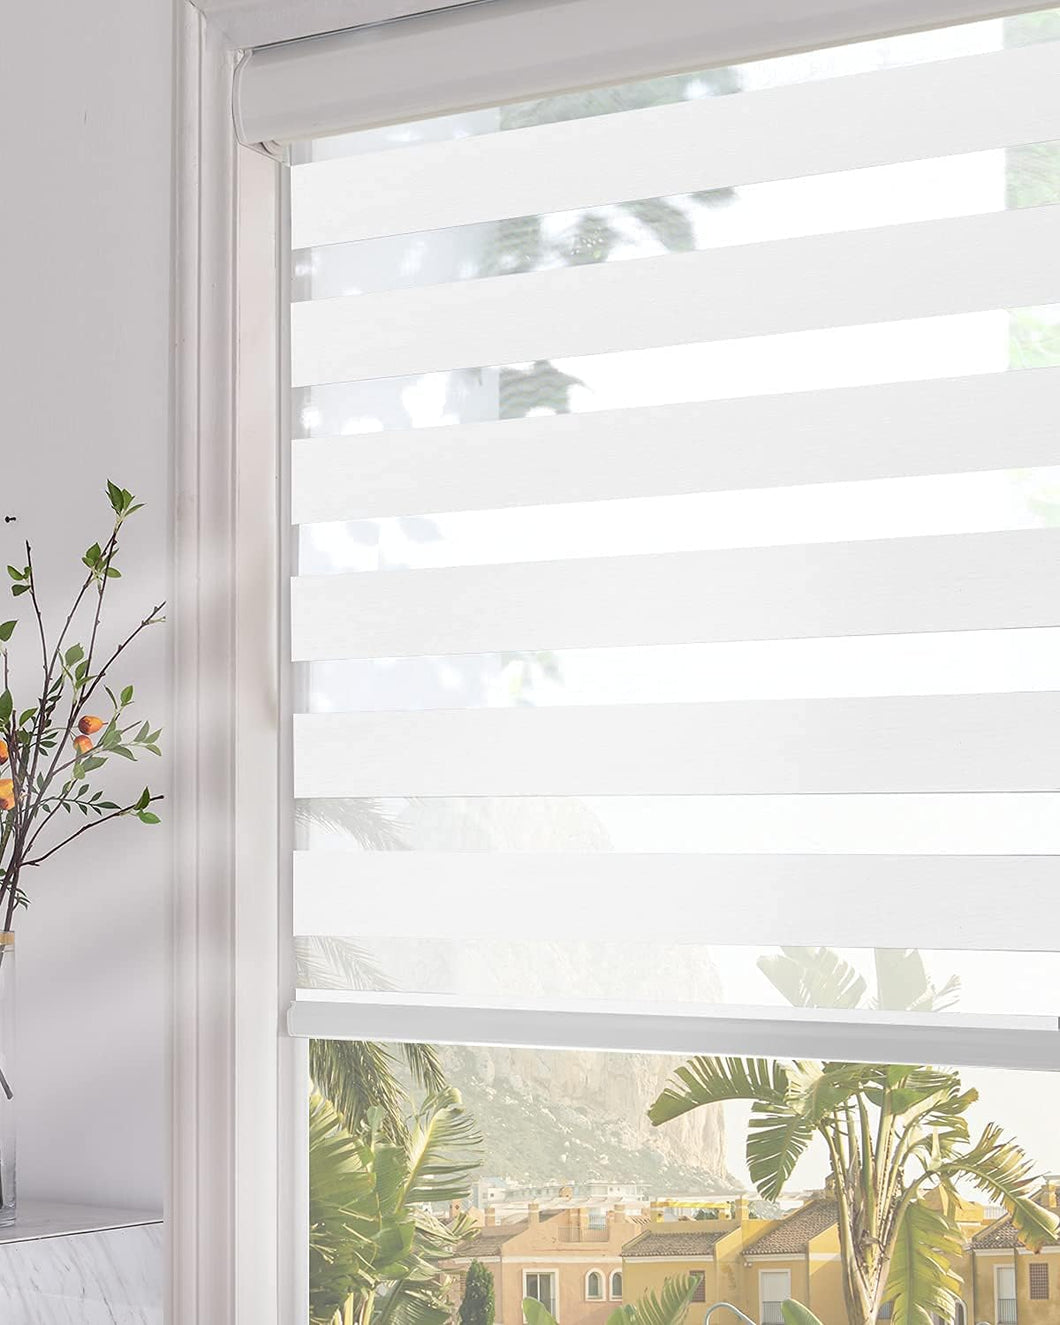 Persilux Zebra Blinds Dual Layer Roller Sheer Shades 40